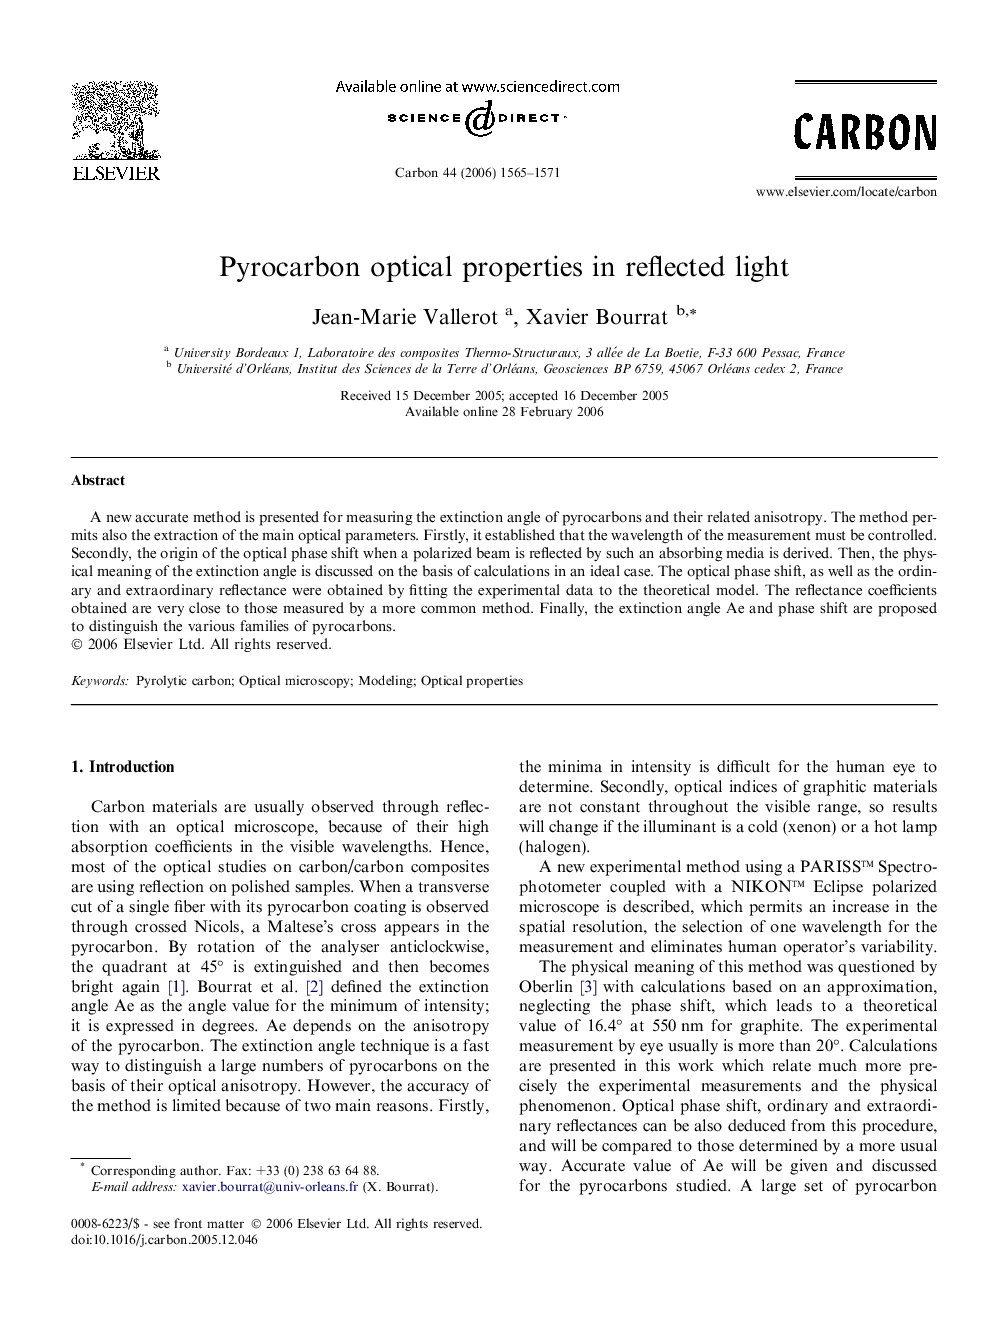 Pyrocarbon optical properties in reflected light